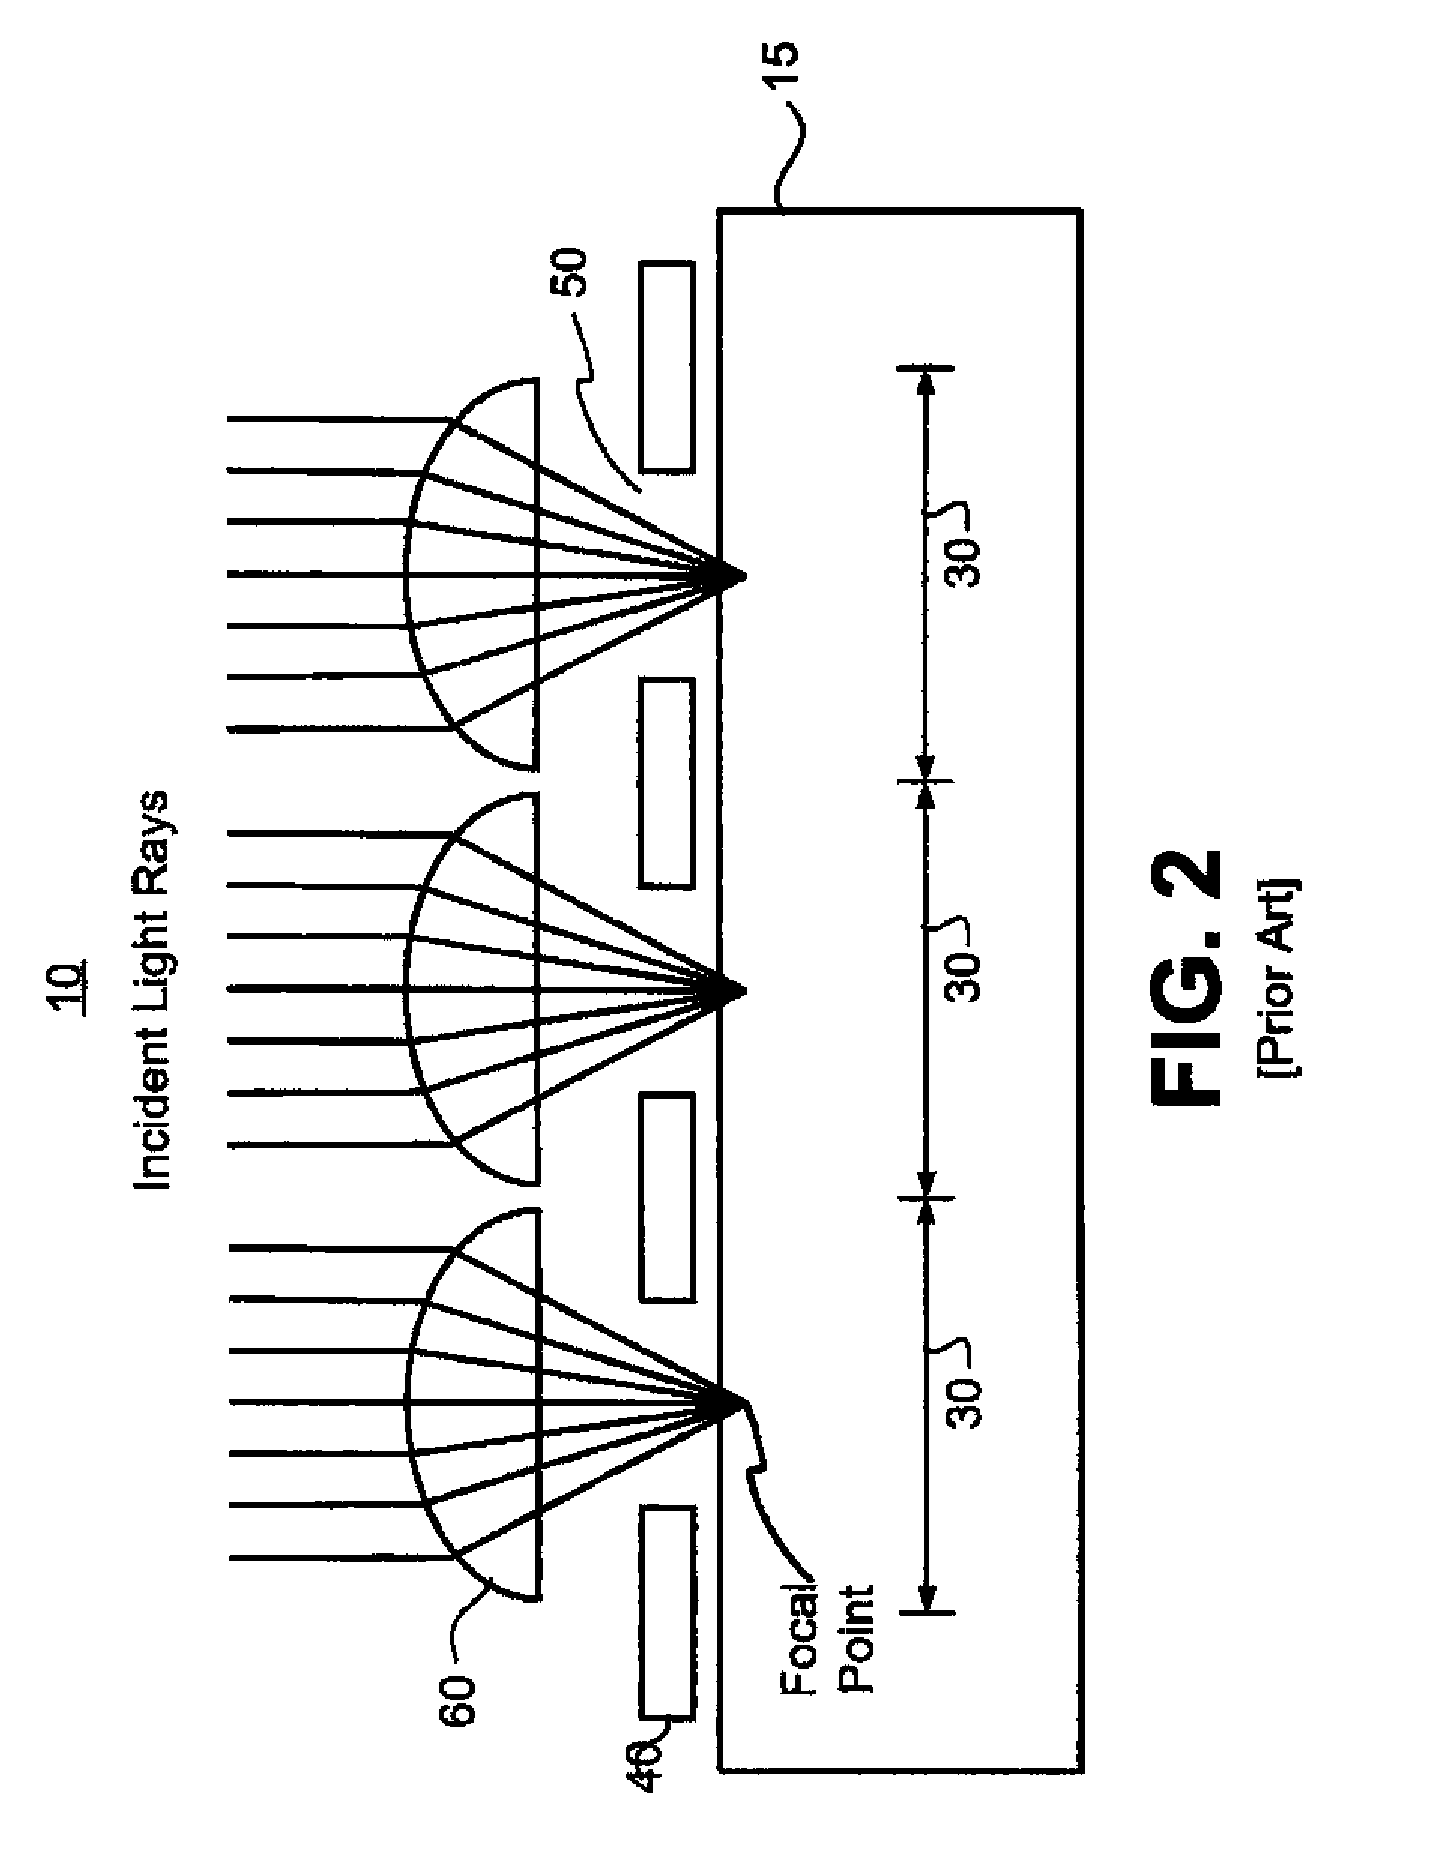 Image sensors with improved angle response